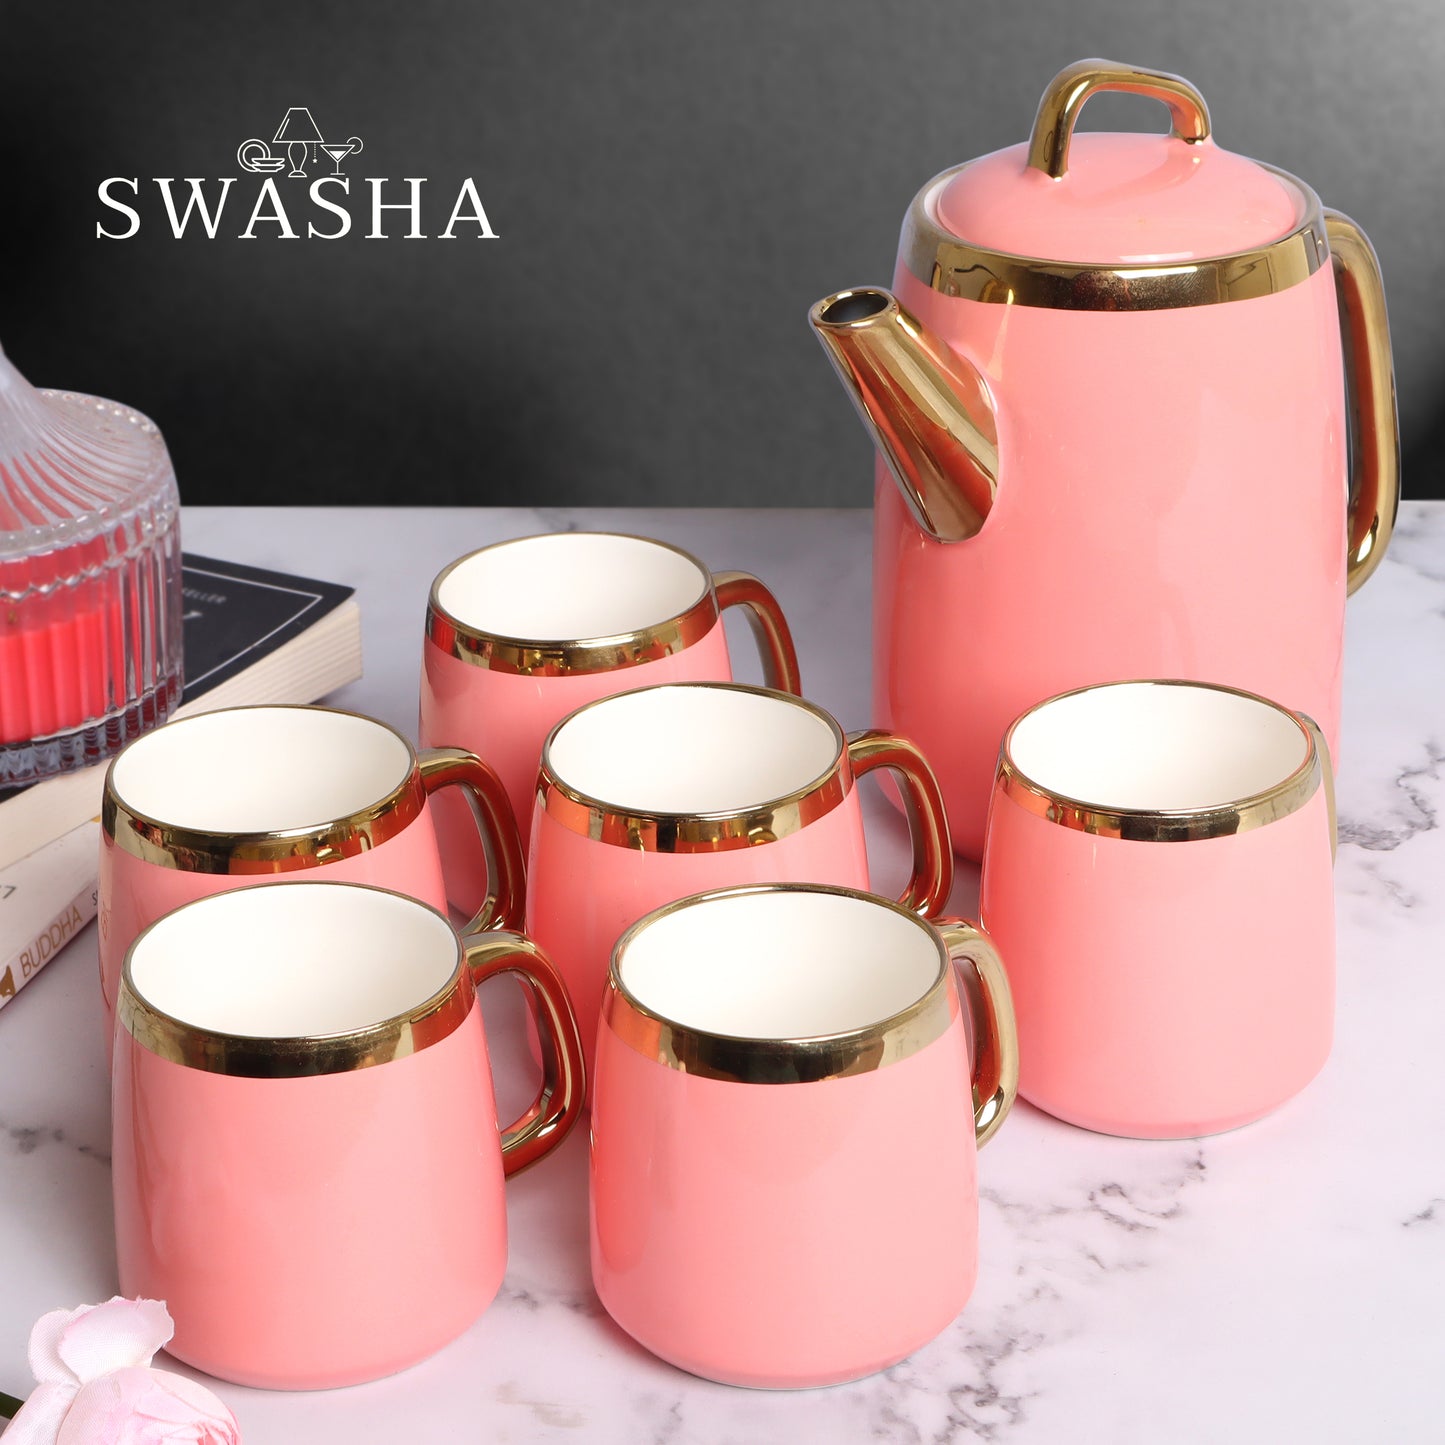 Swasha Ceramic Cups and Kettle Set of 6 With Tray